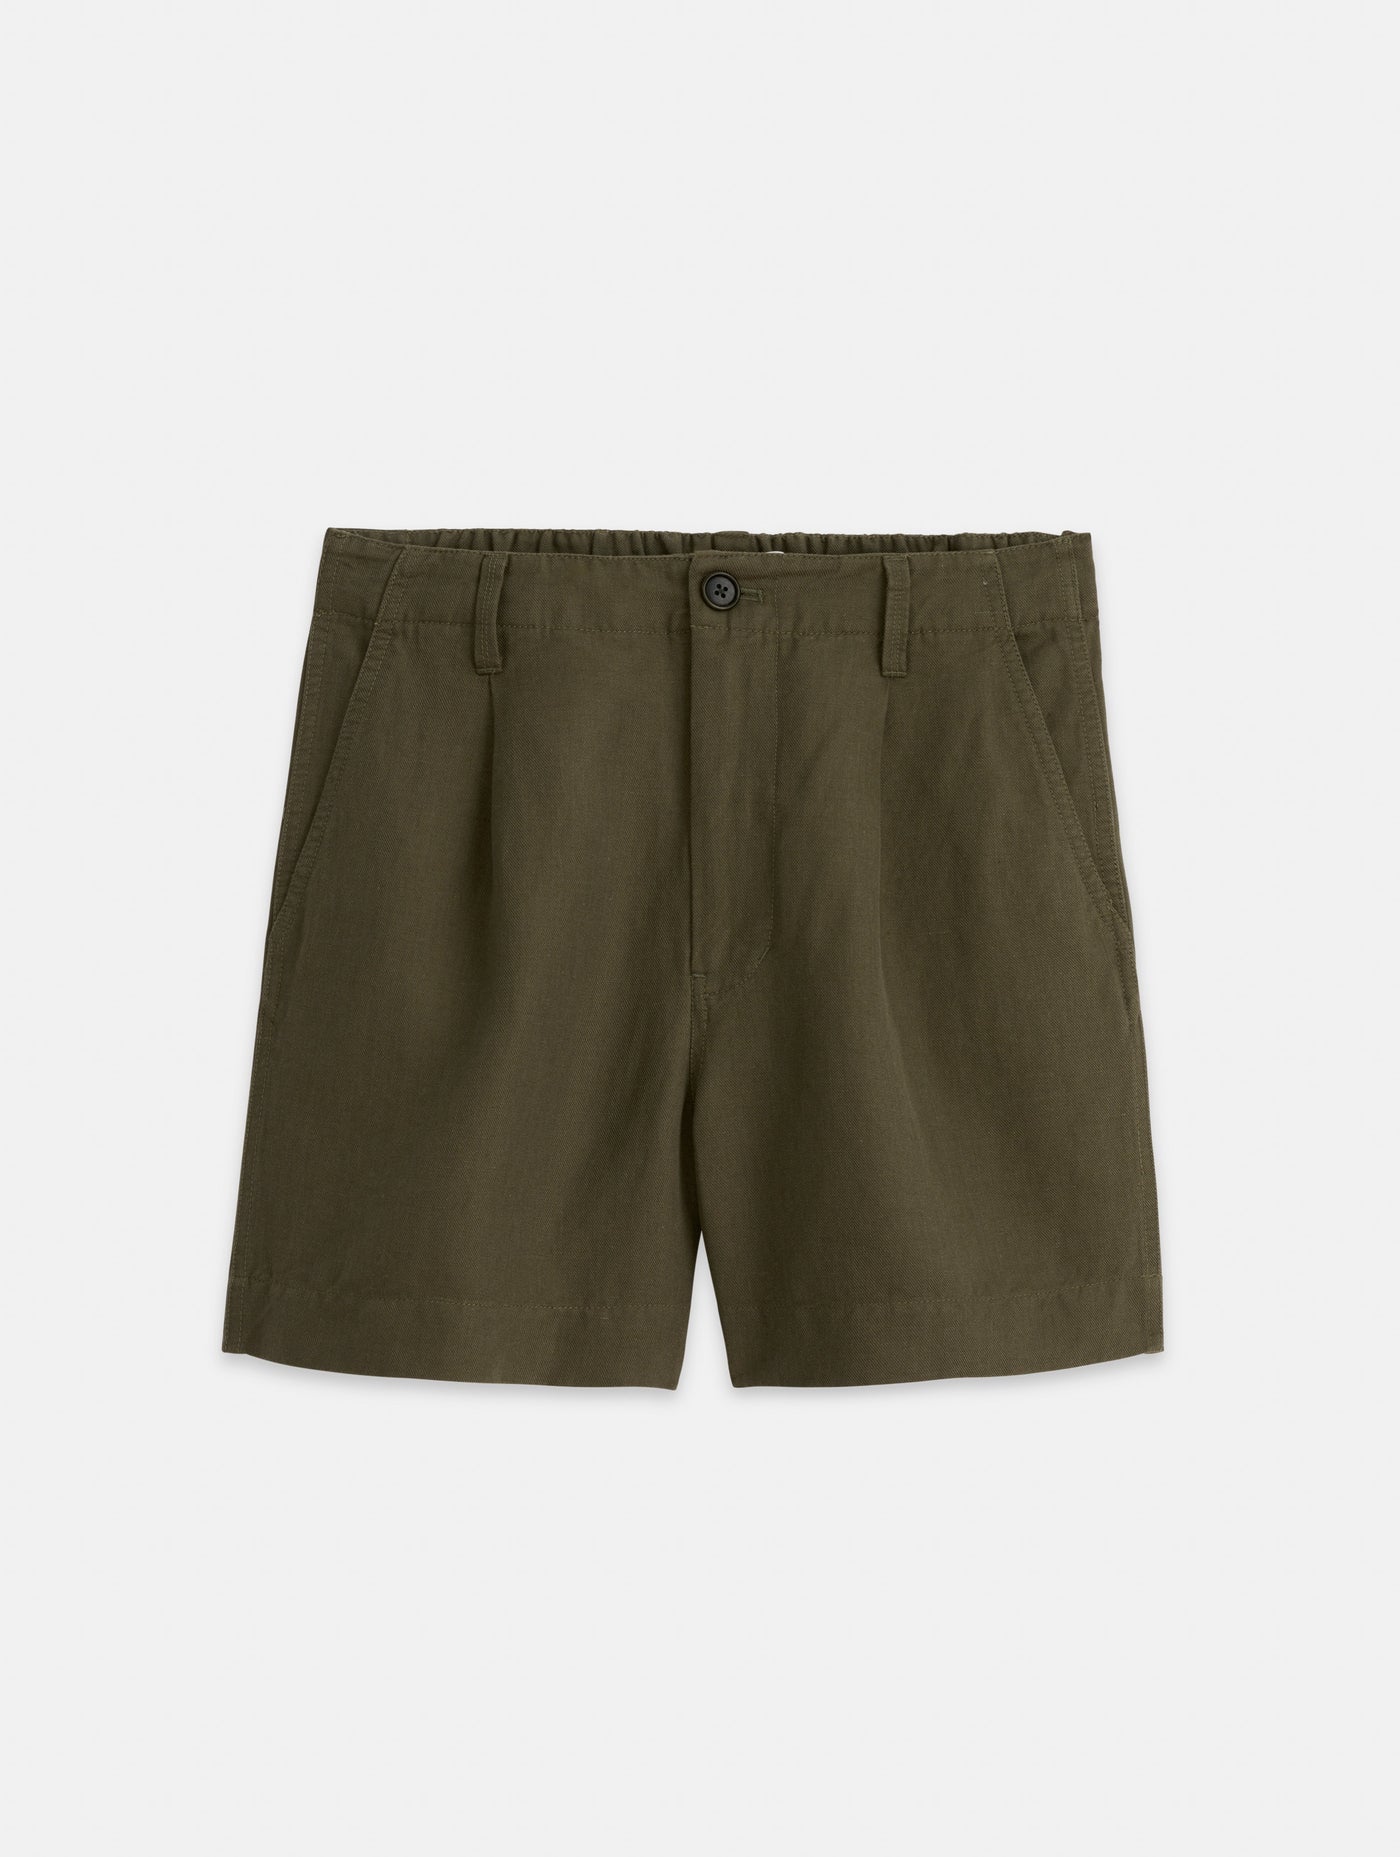 Madeline Pleated Shorts in Twill